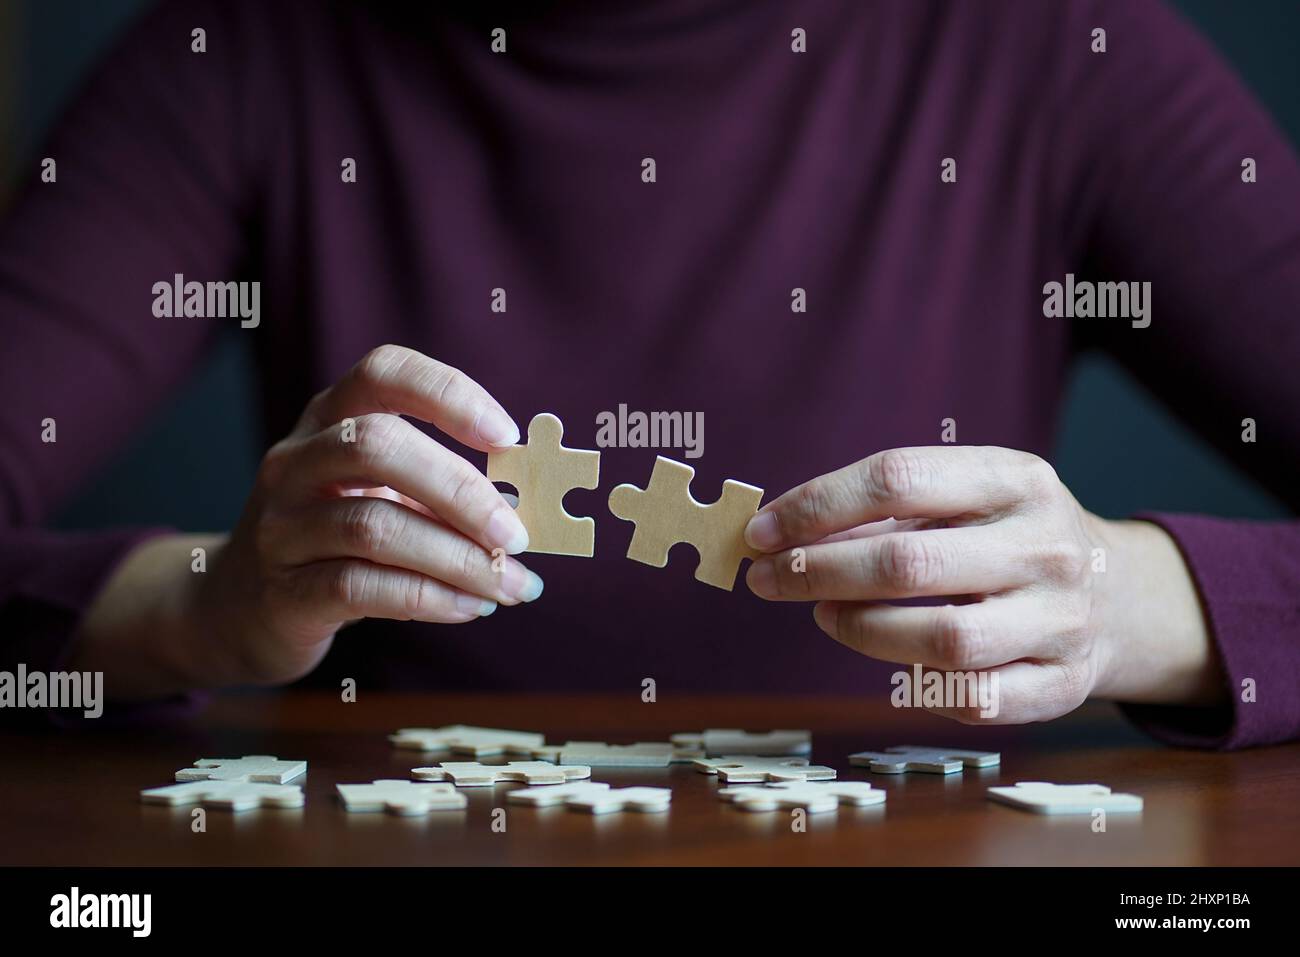 Clsoe up view of woman connecting jigsaw puzzle. Team work, success or strategy concept. Stock Photo